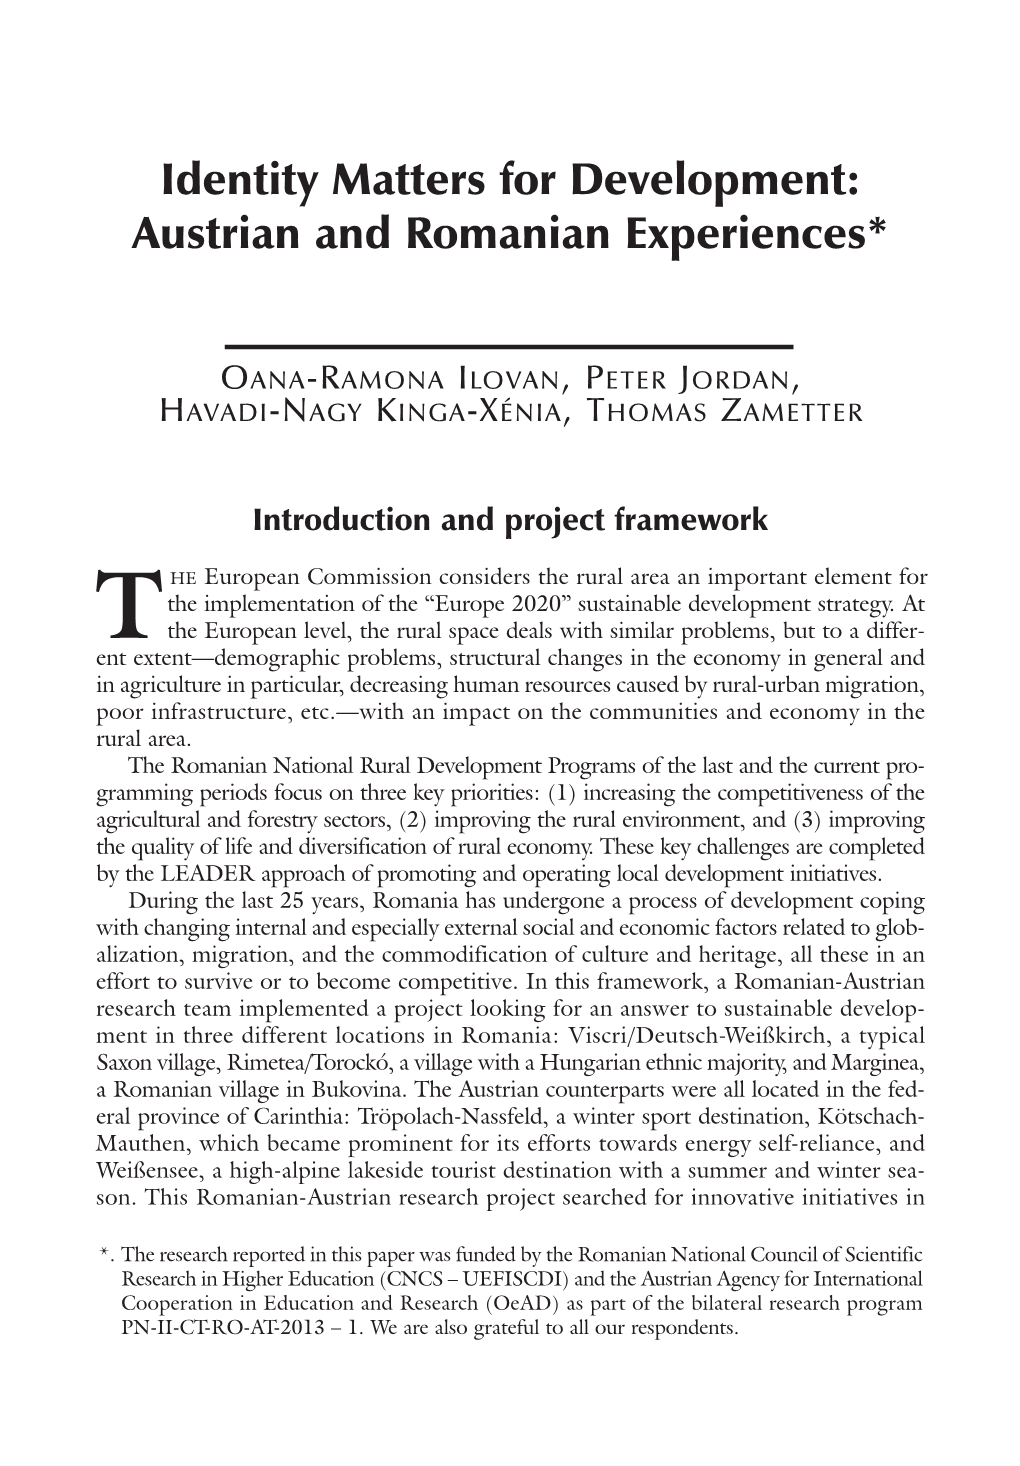 Identity Matters for Development: Austrian and Romanian Experiences*